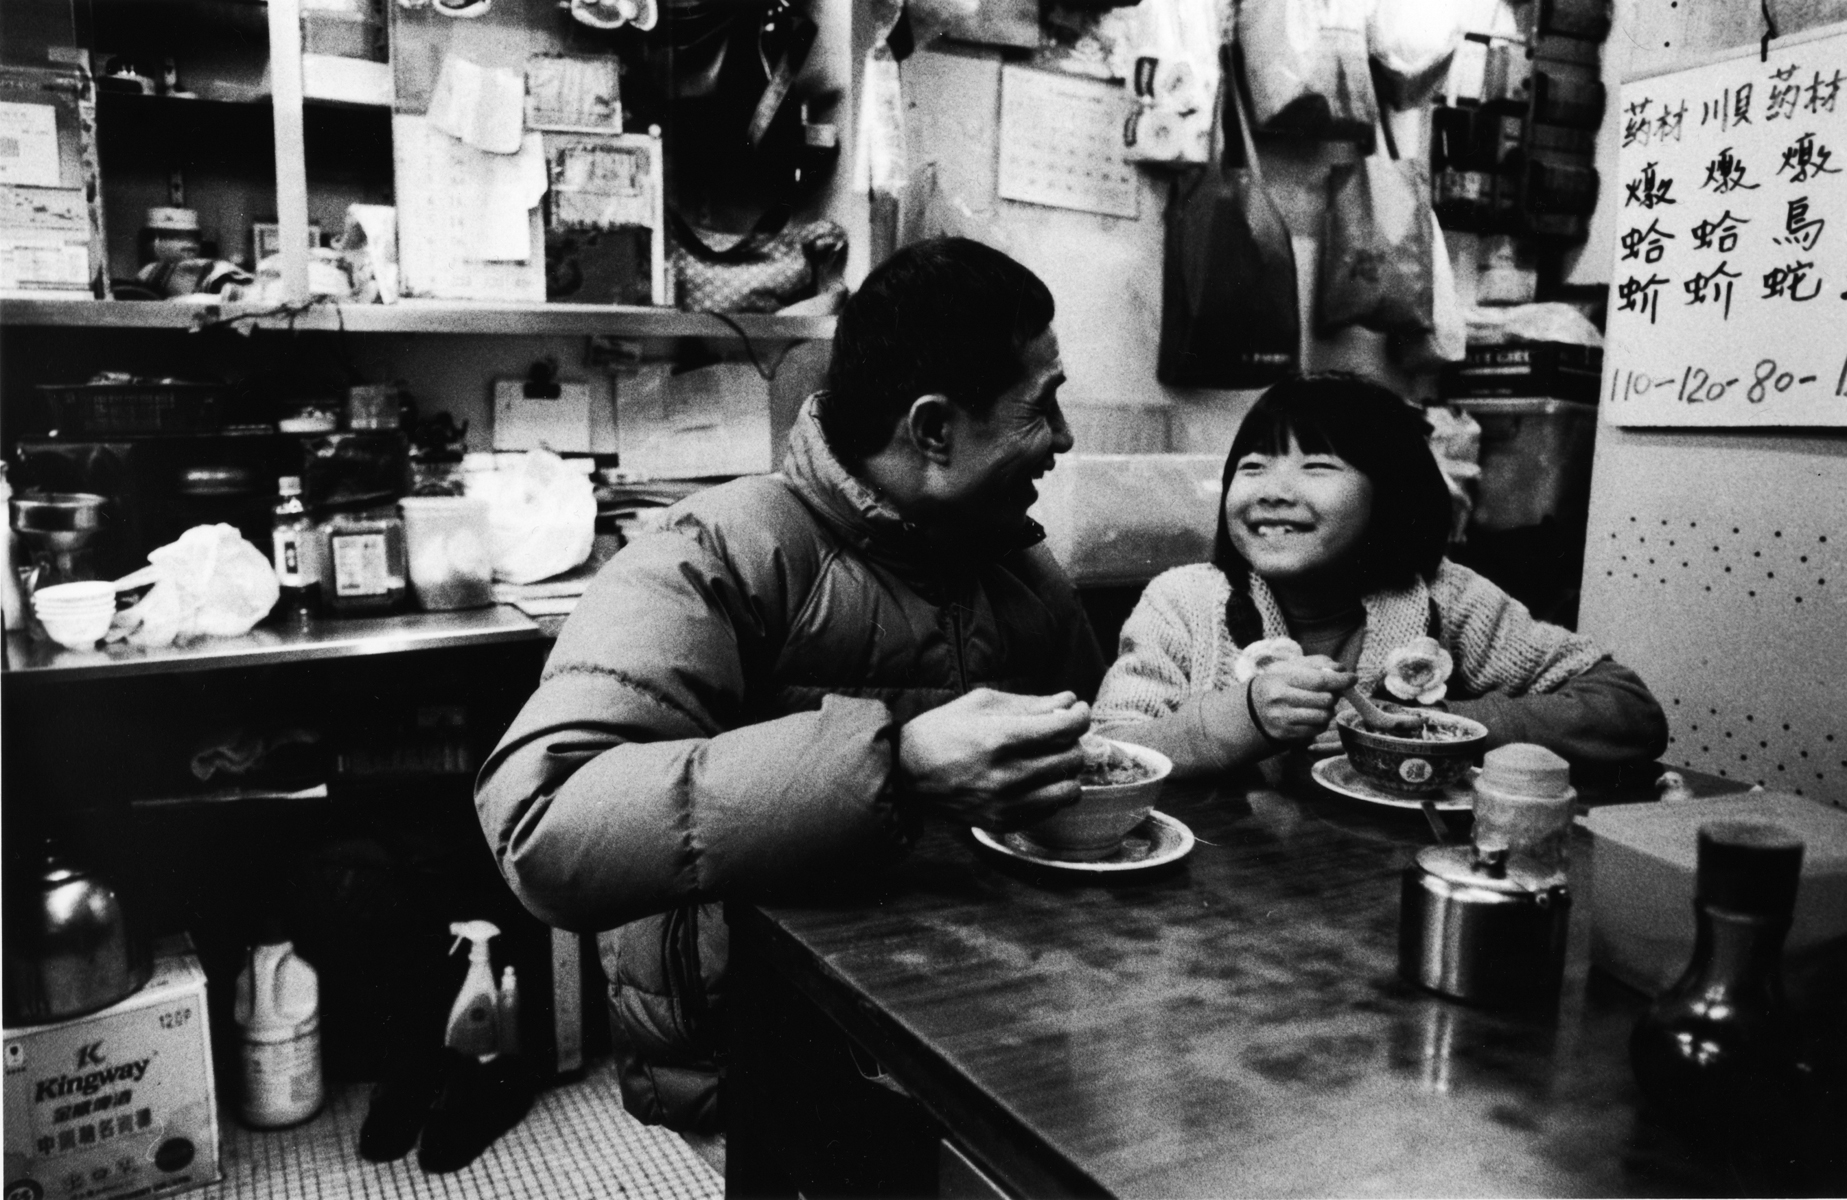 A father enjoys a bowl of noodles with his daughter. Kowloon Peninsula, Hong Kong